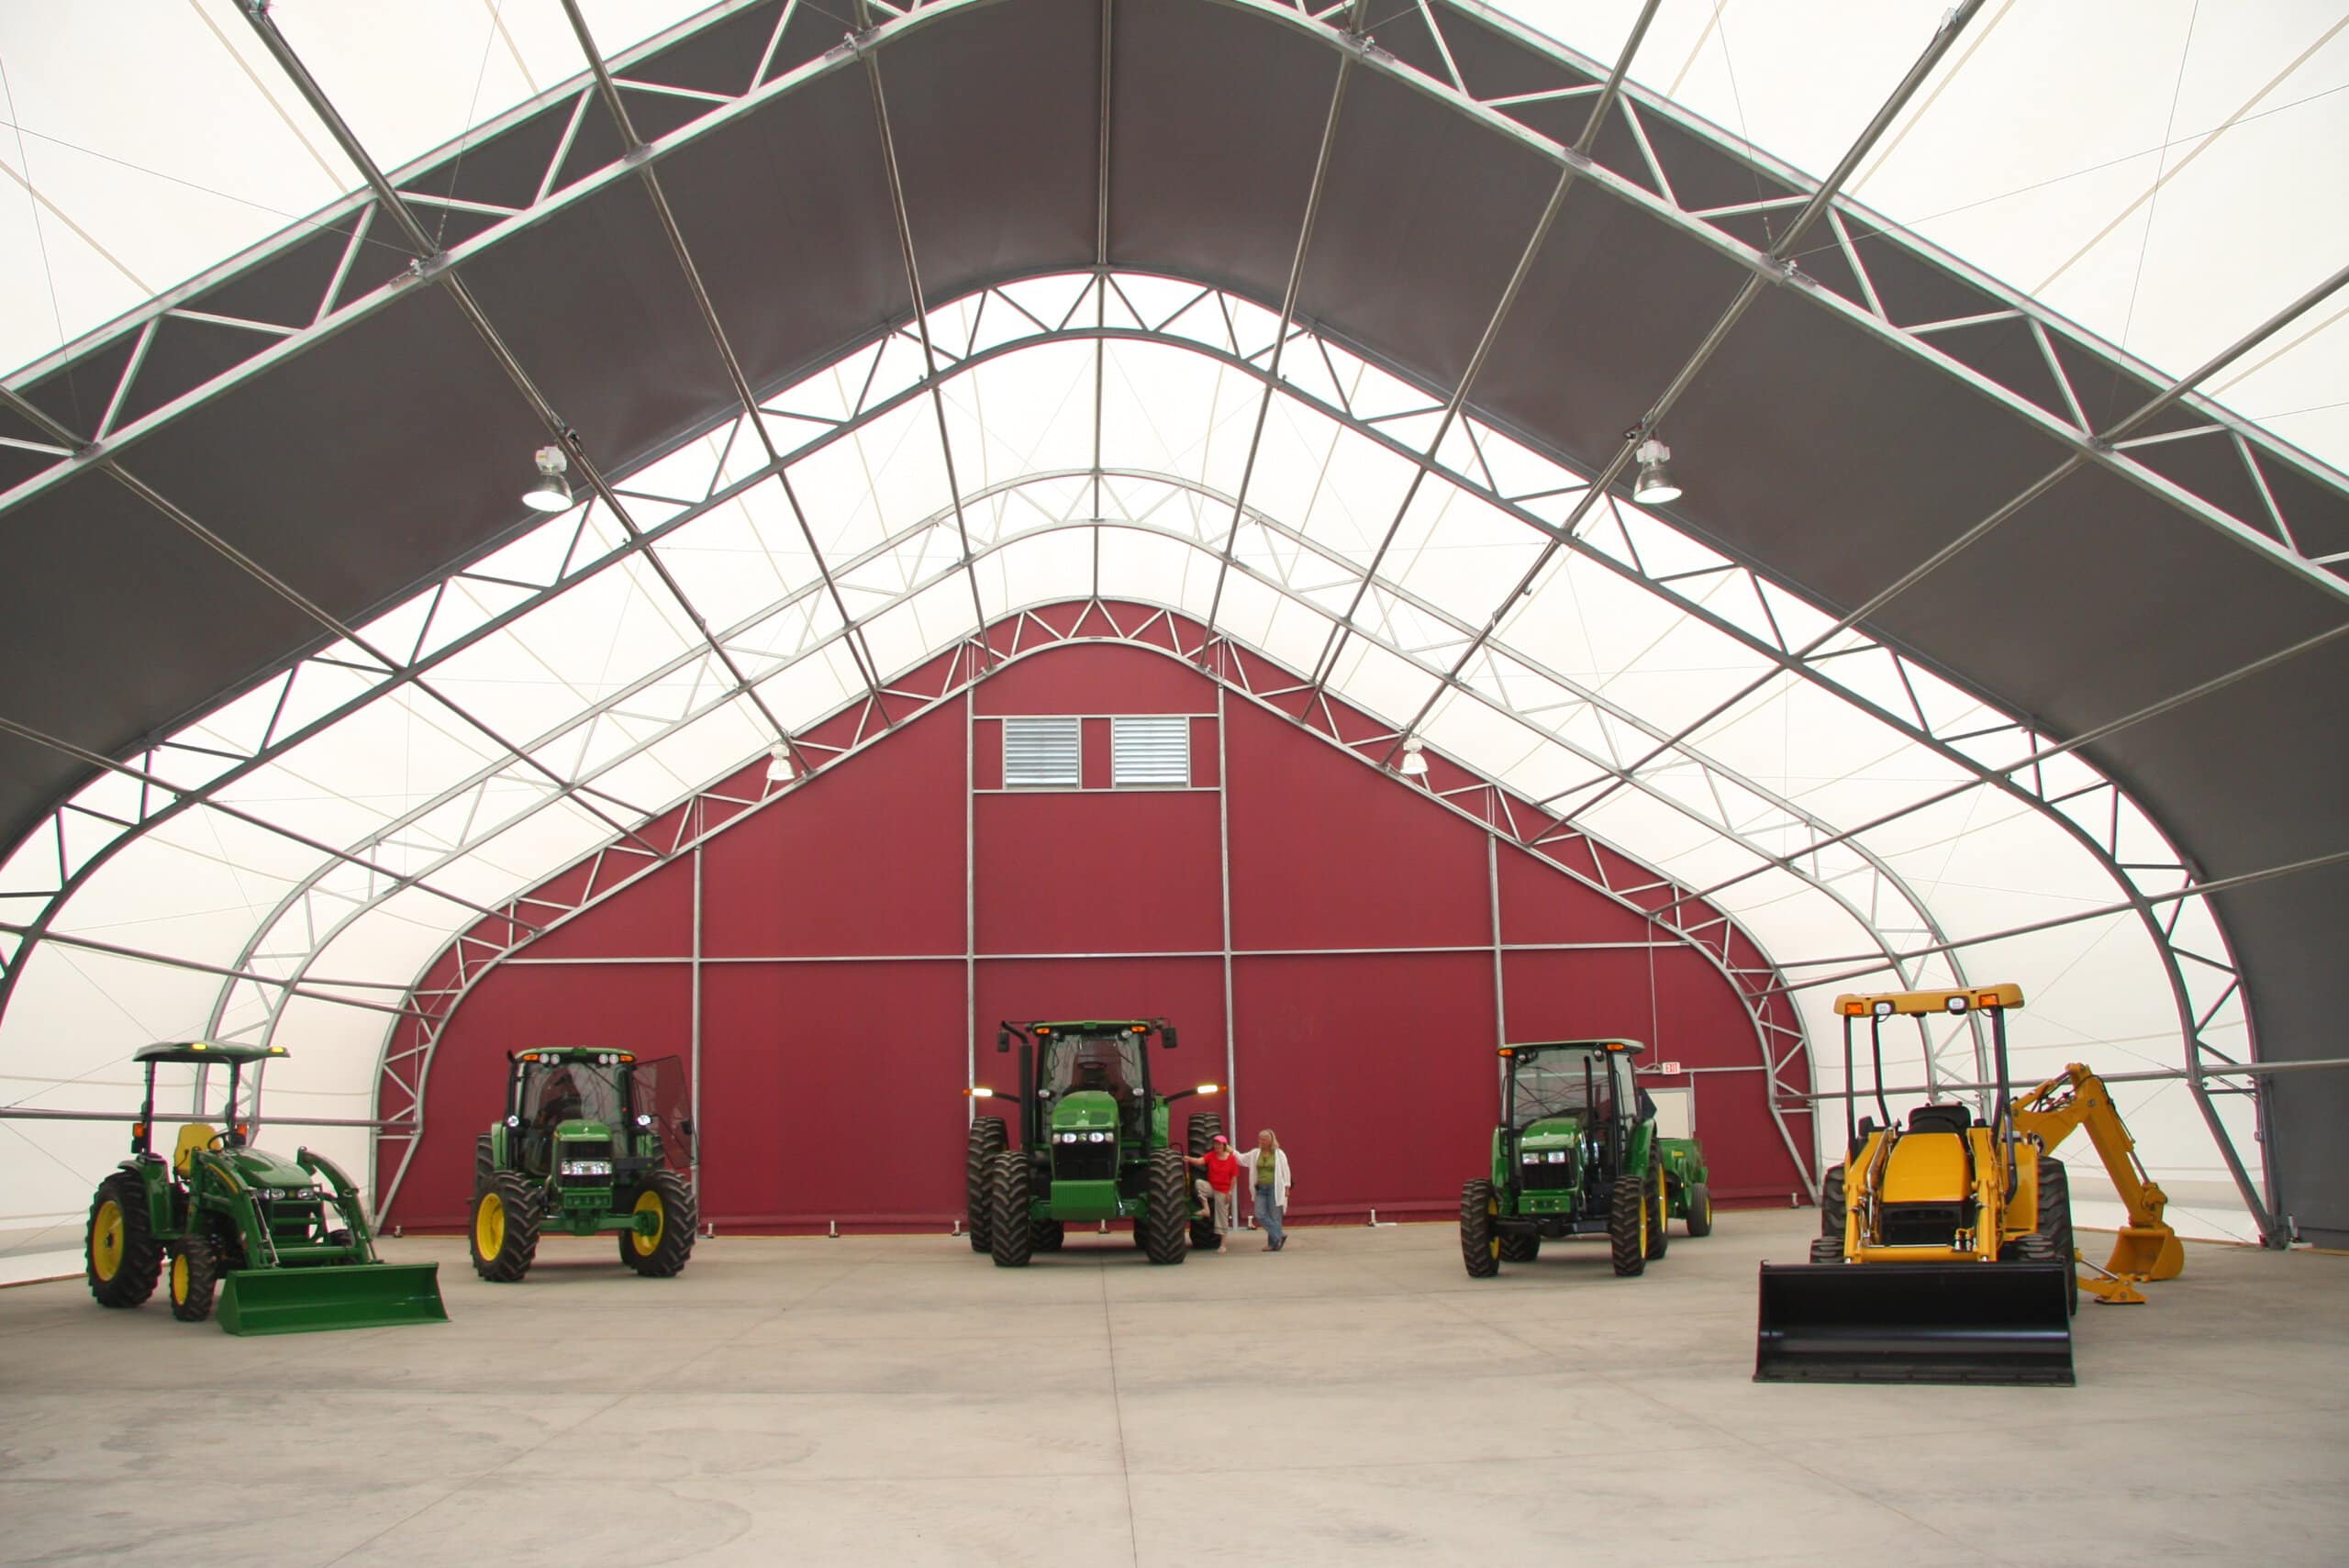 farm equipment in large fabric structure